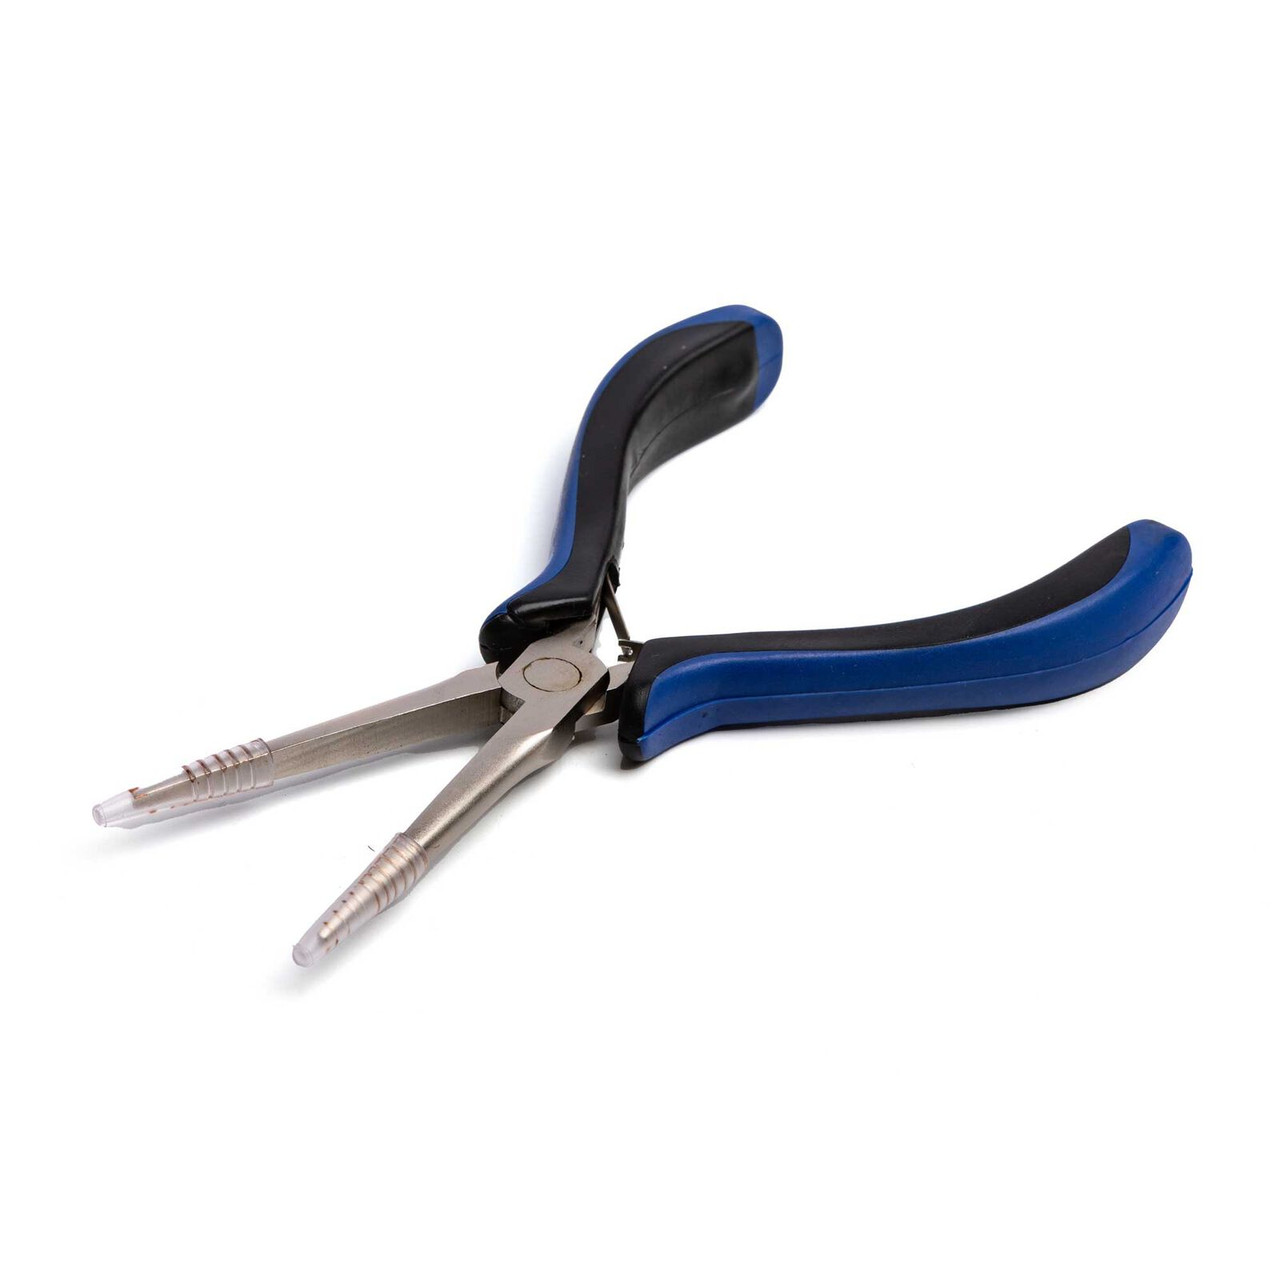 Hobby Essentials Pliers, Springloaded Needle Nose